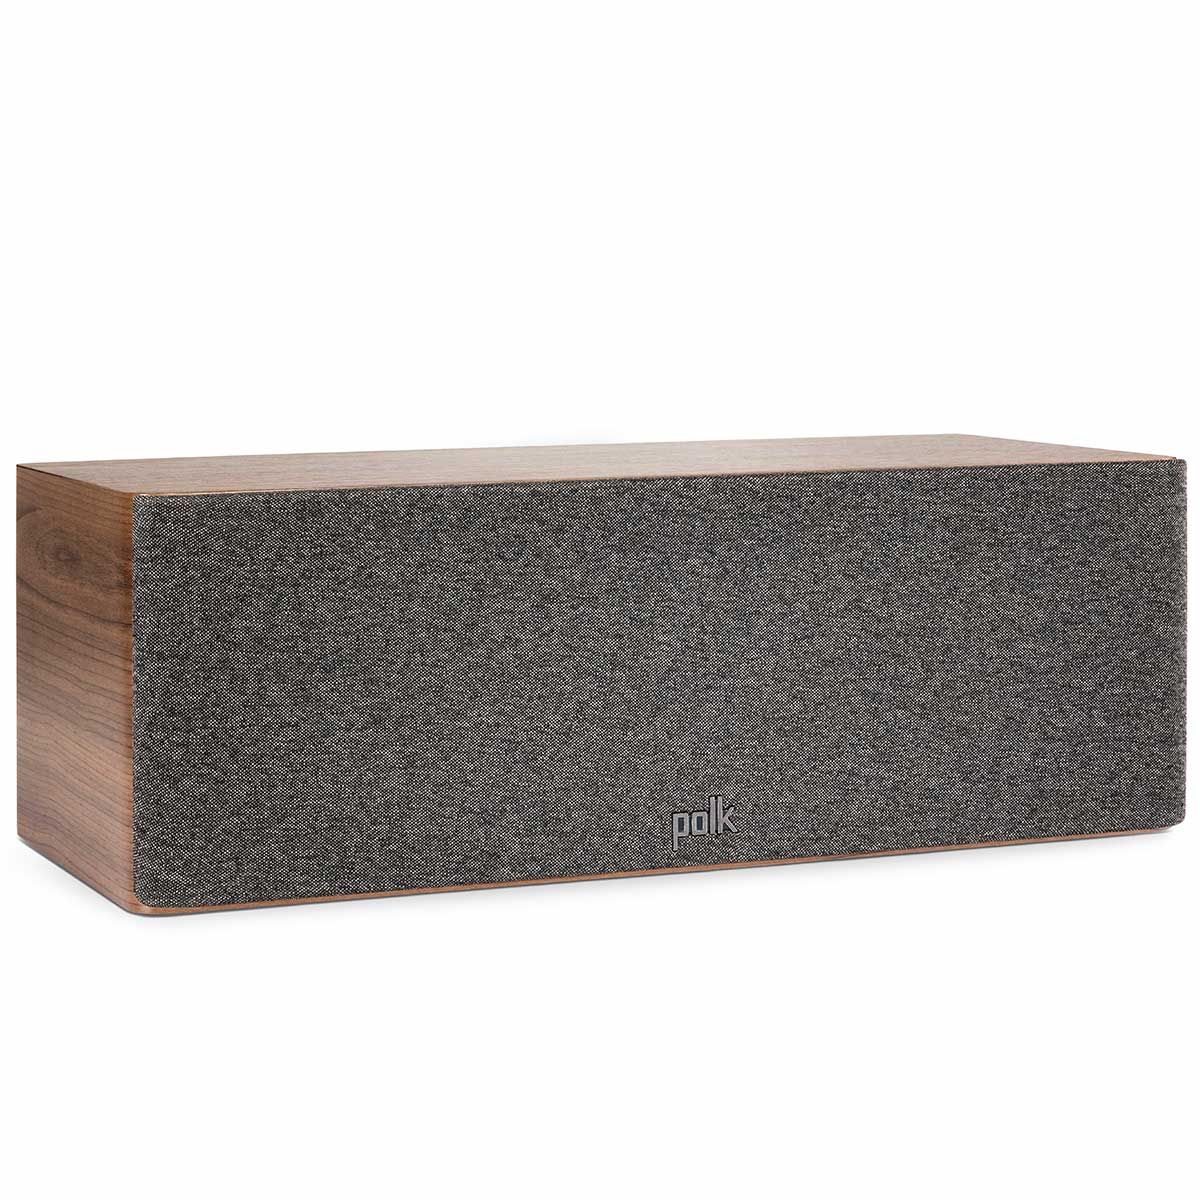 Polk R300 Speaker, Walnut, front right angle with grille